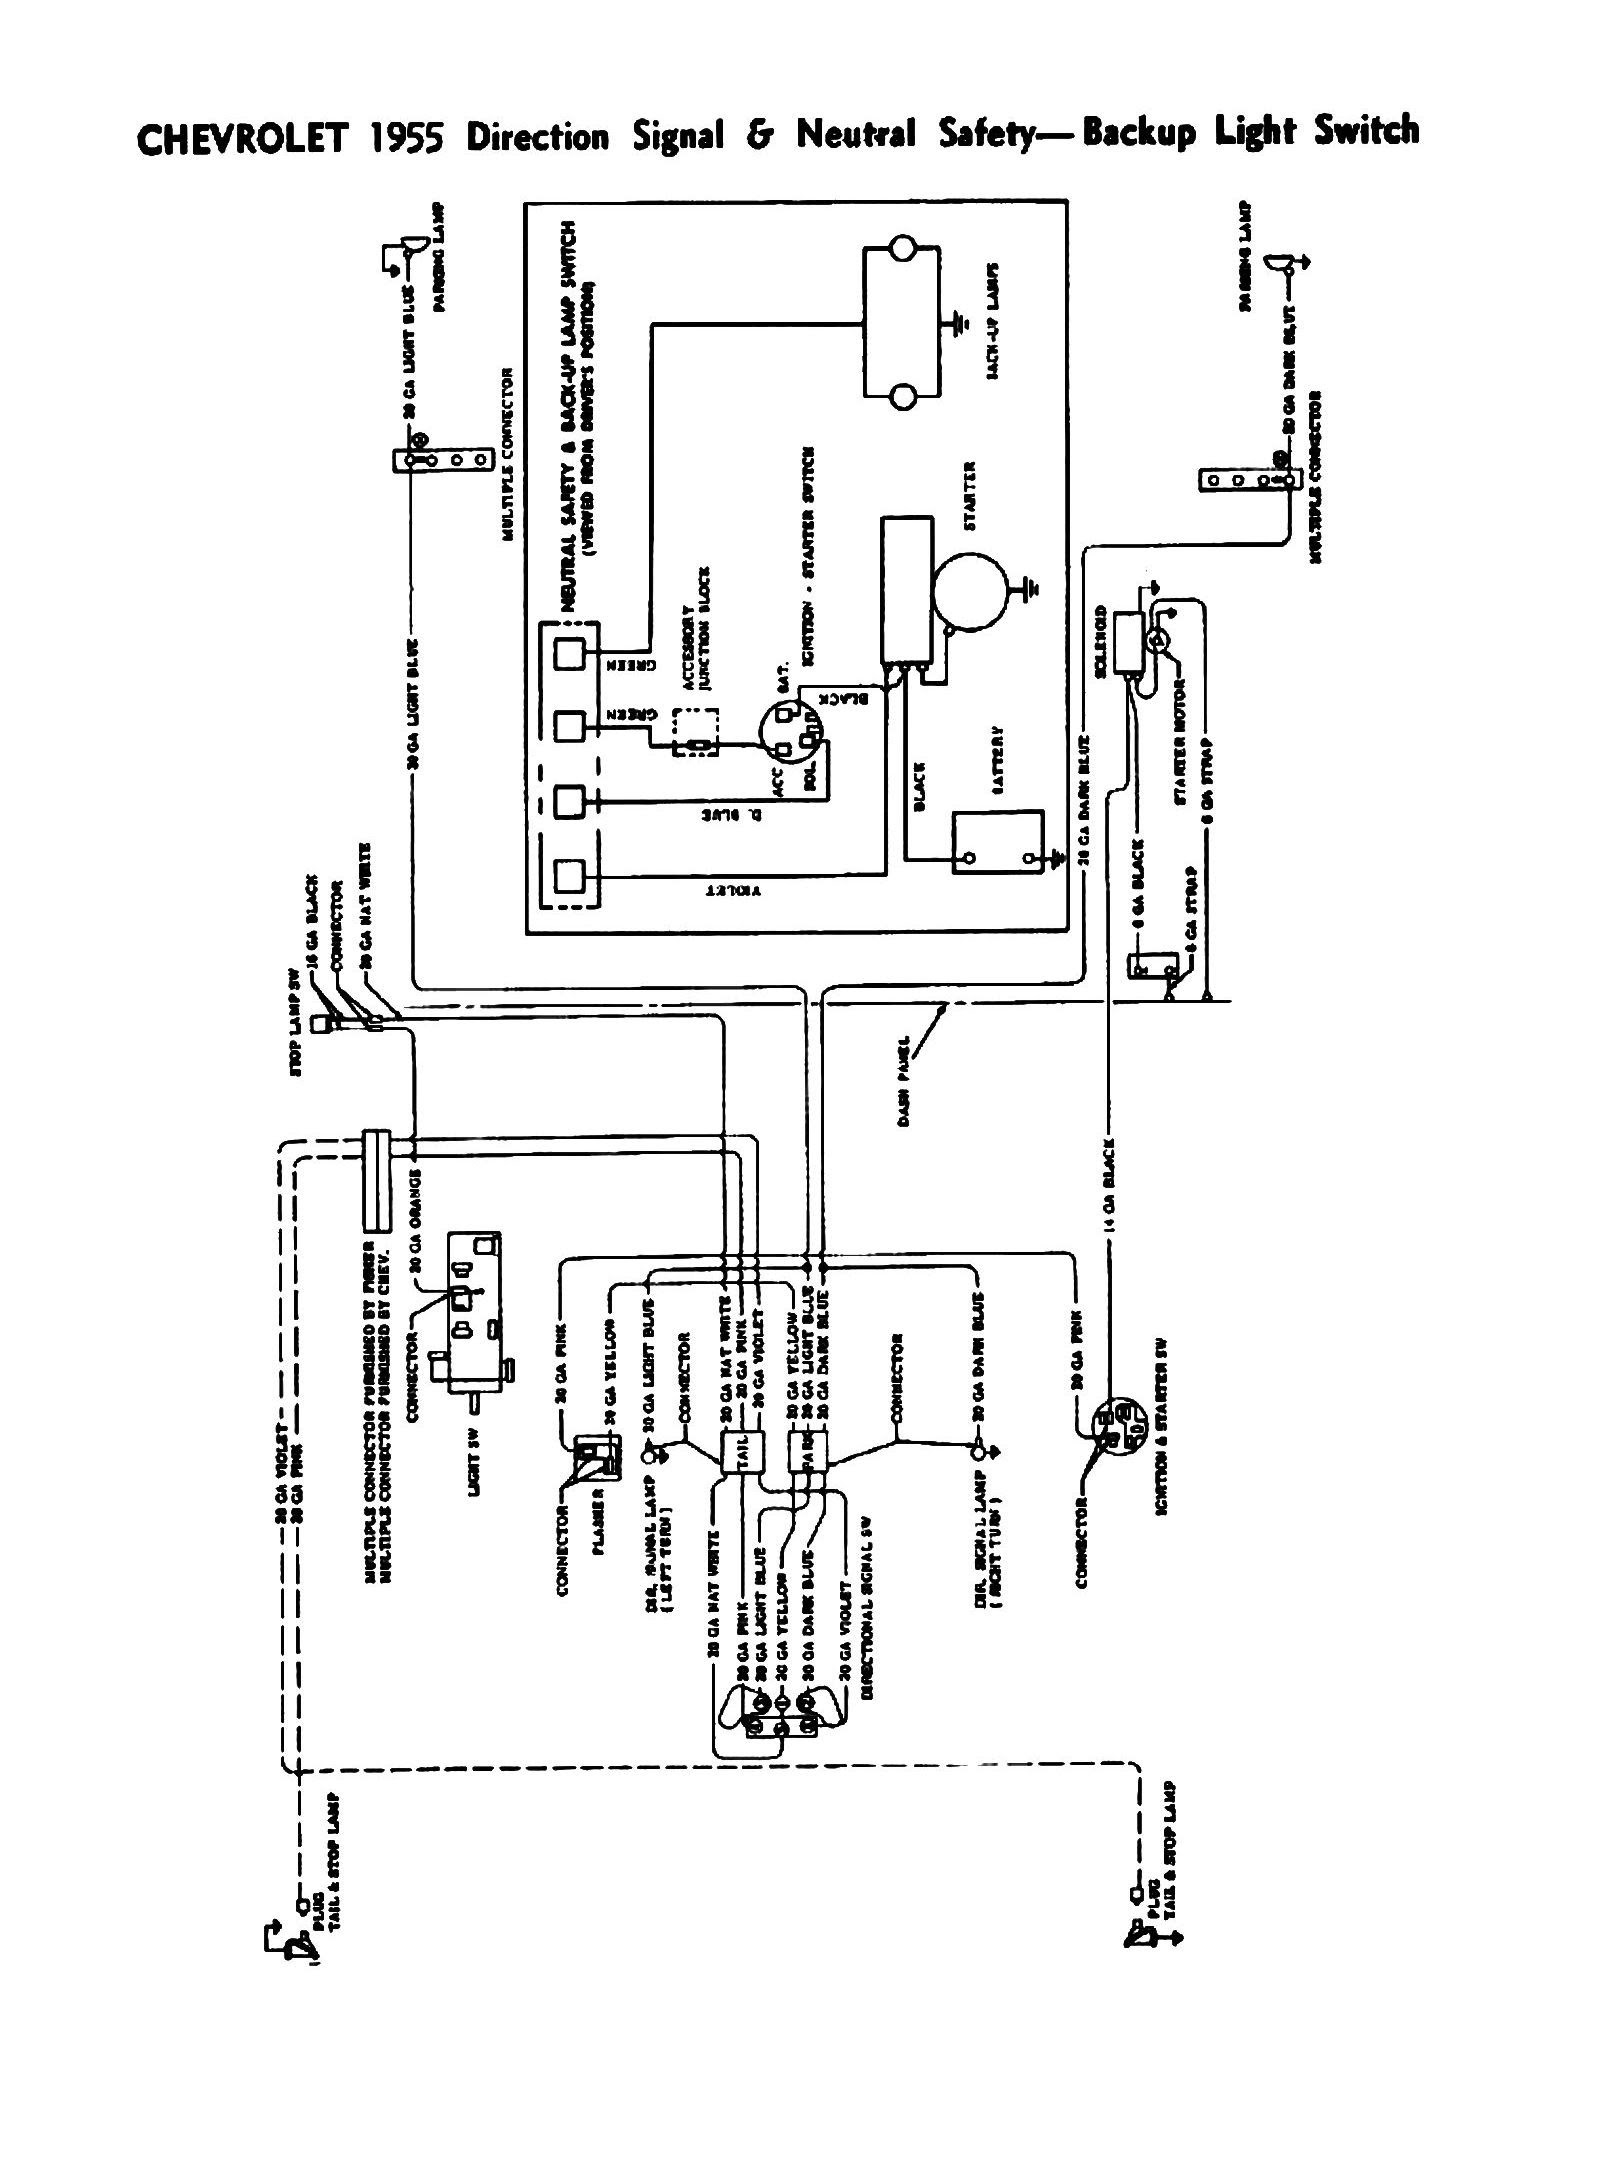 56 Ford F100 Wiring - Wiring Diagram Networks